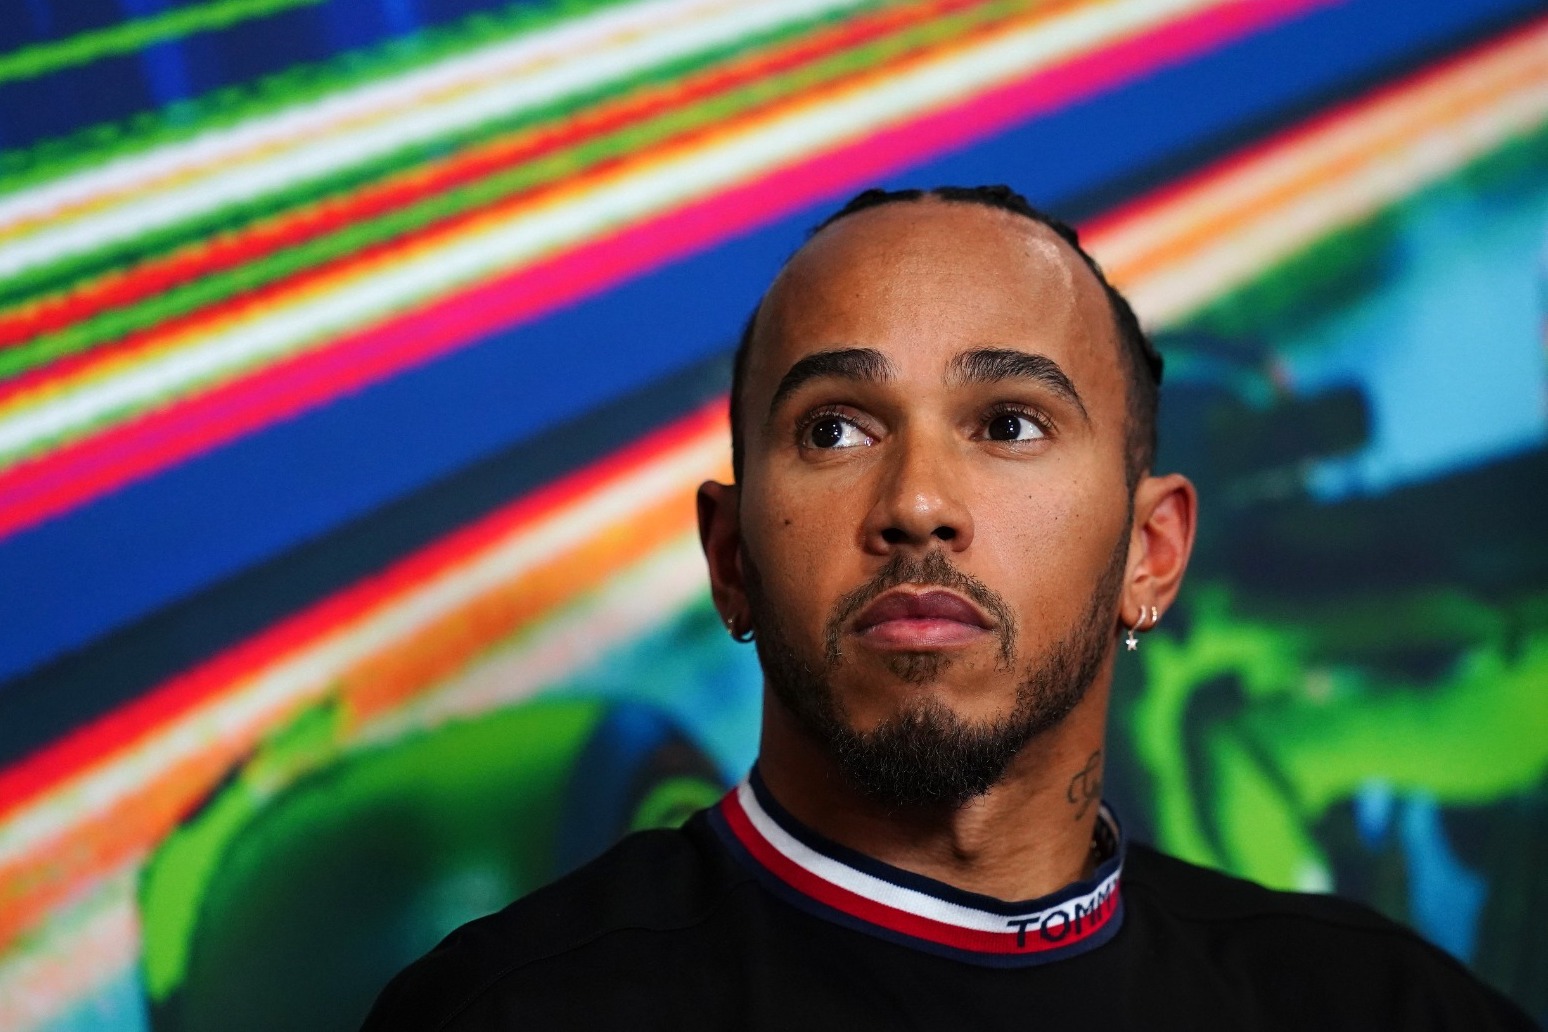 Lewis Hamilton: I had bananas thrown at me and was called the n-word at school 